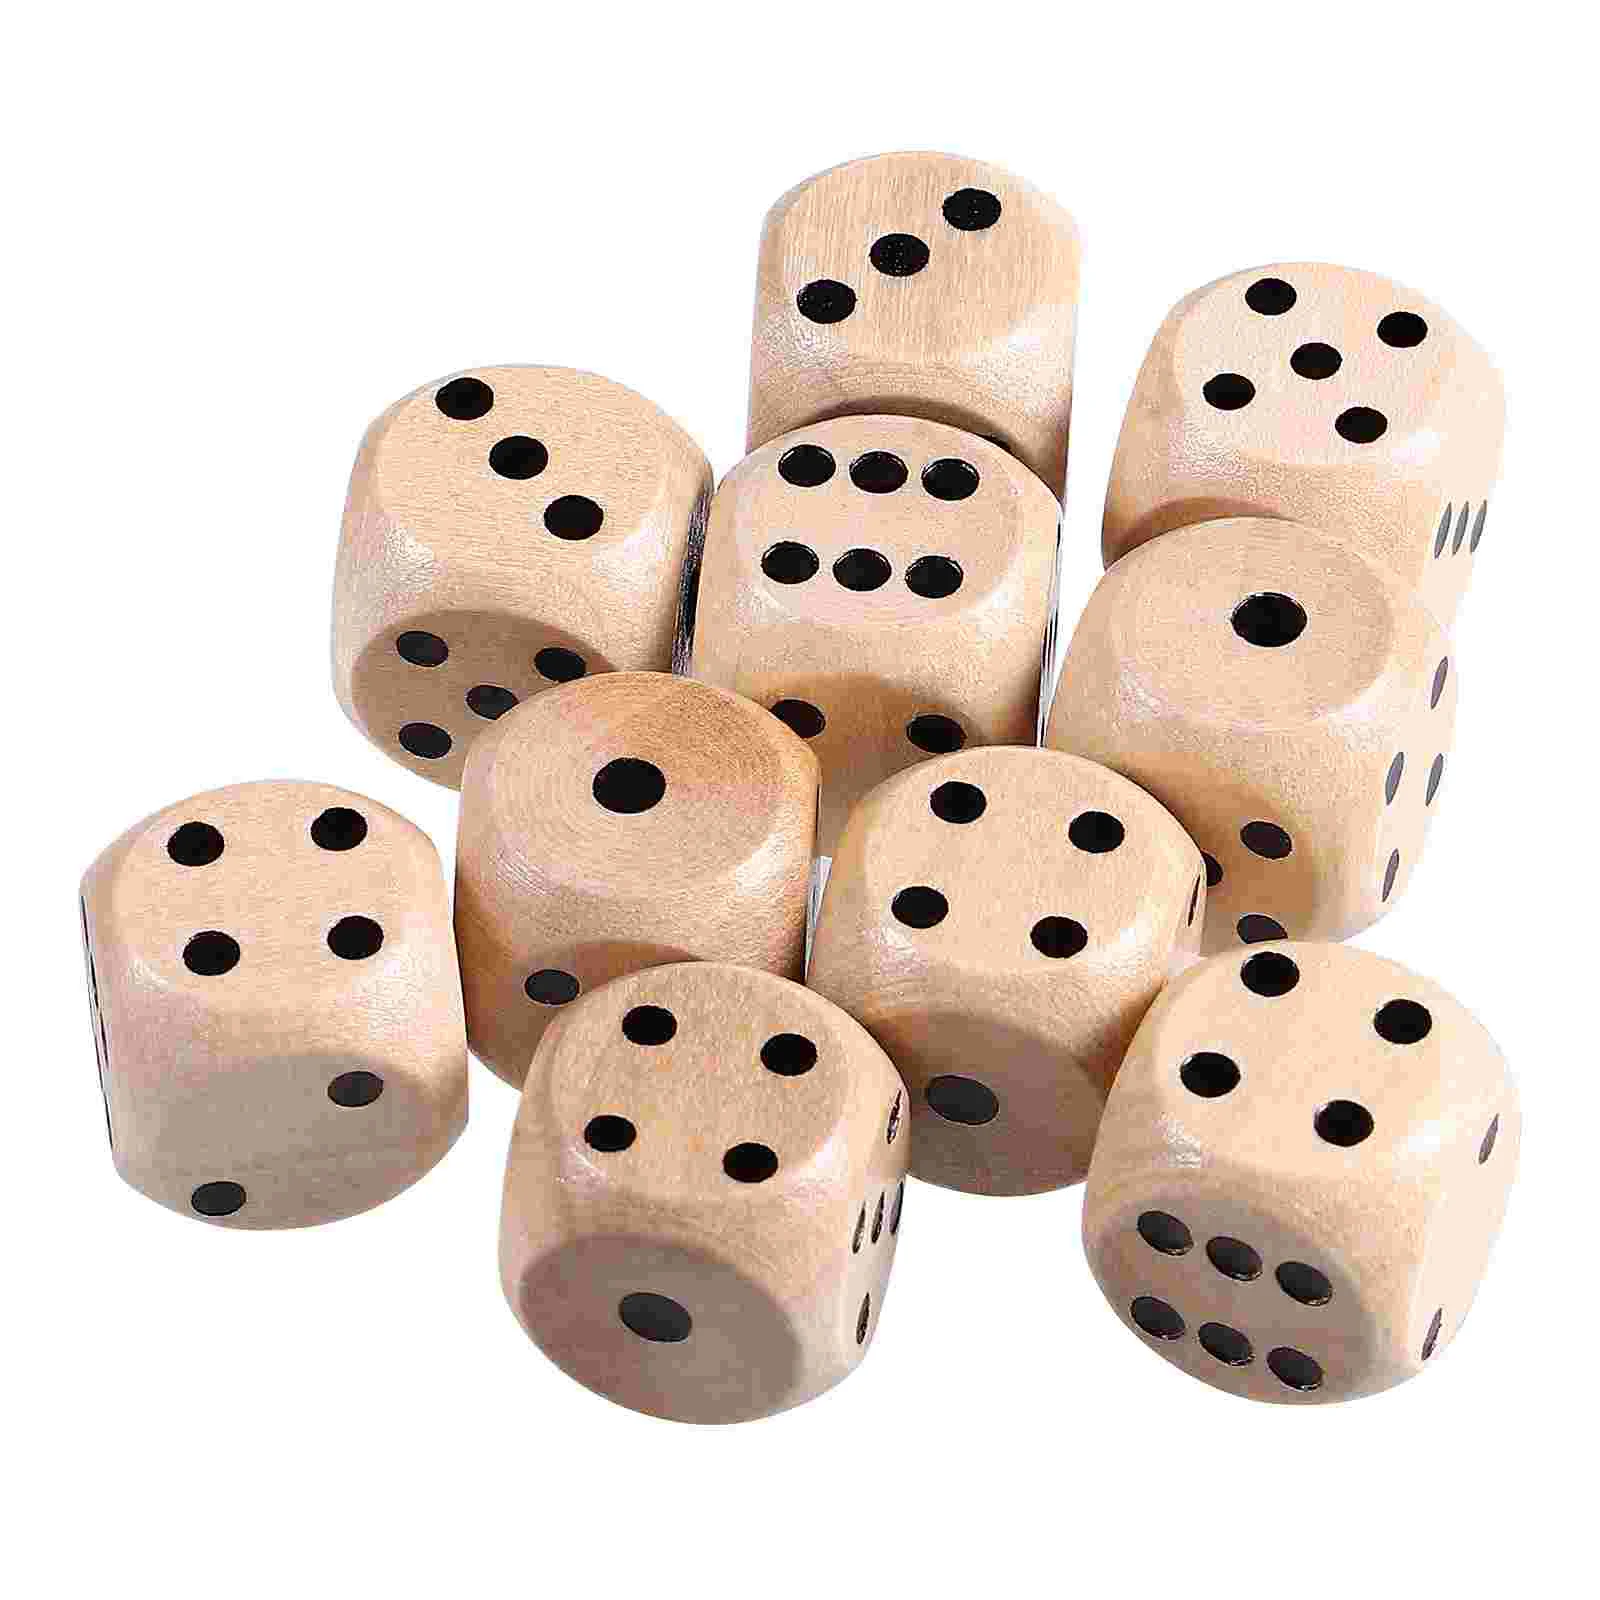 10Pcs Six Sided Square Opaque 10Mm D6 Dice Portable Table Games Tool HK 